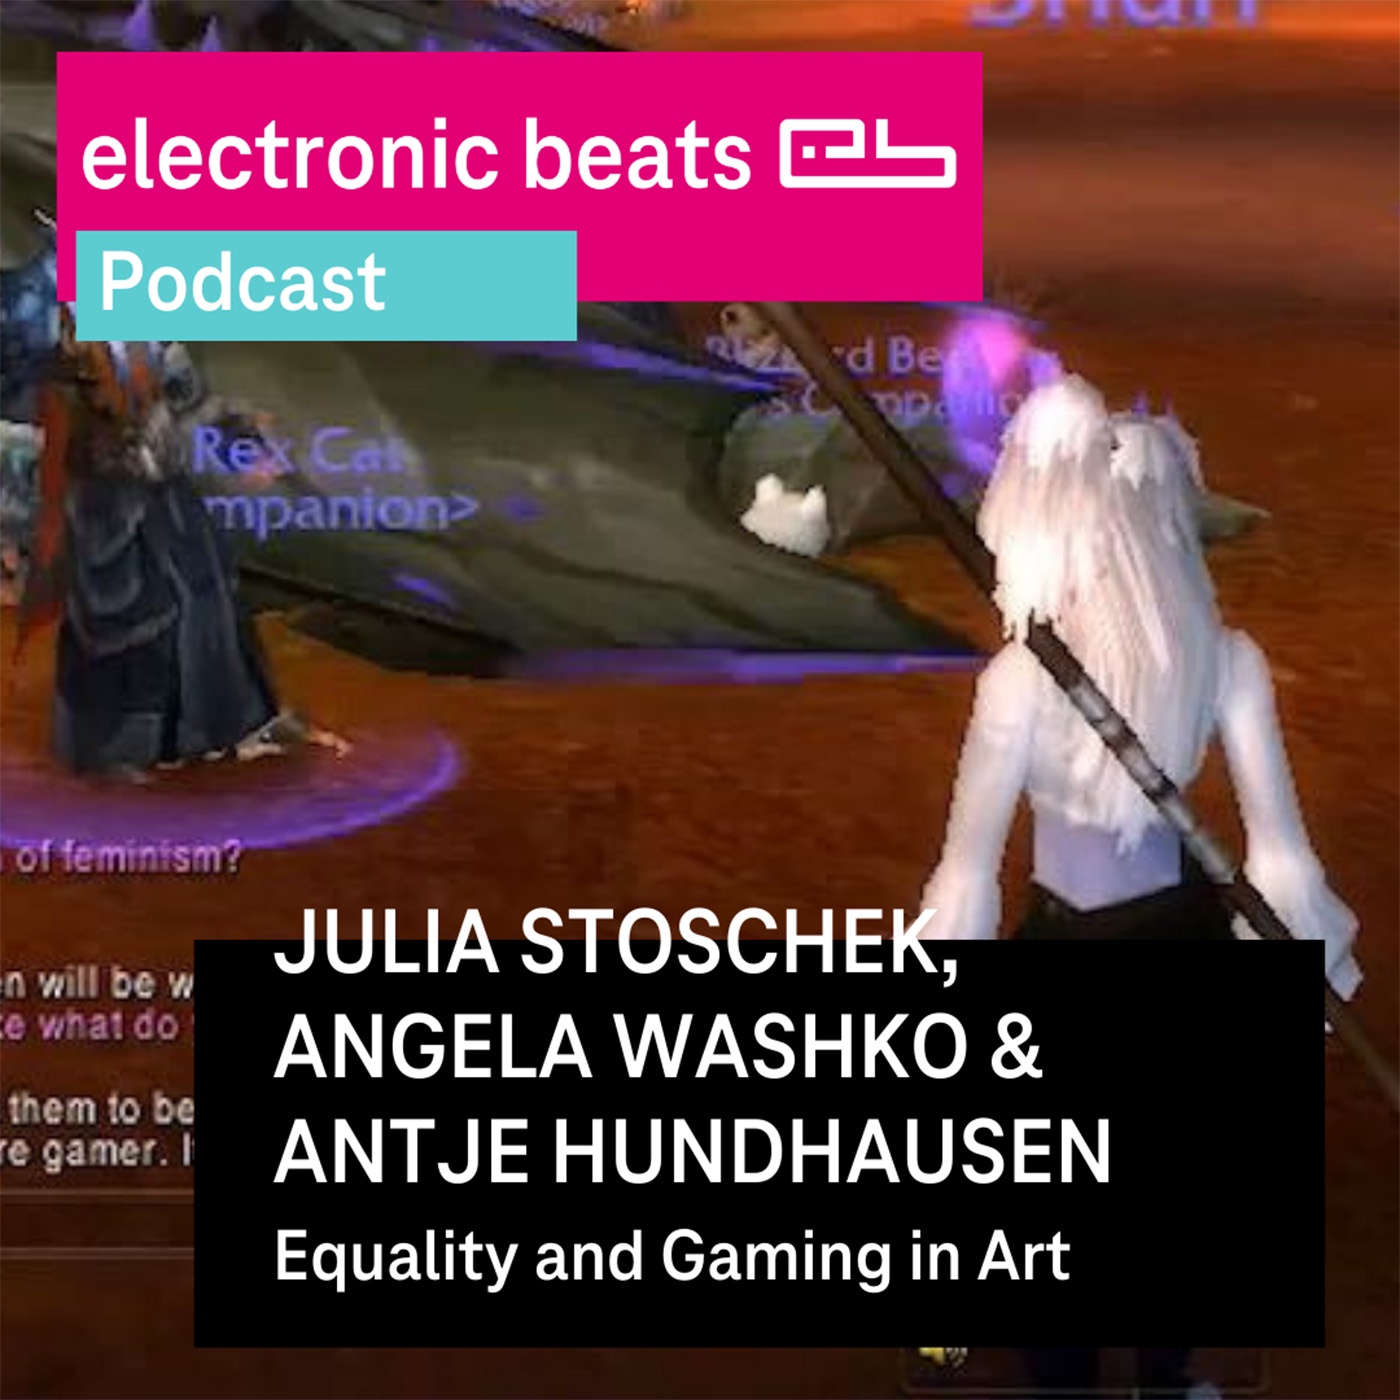 Equality and Gaming in Art